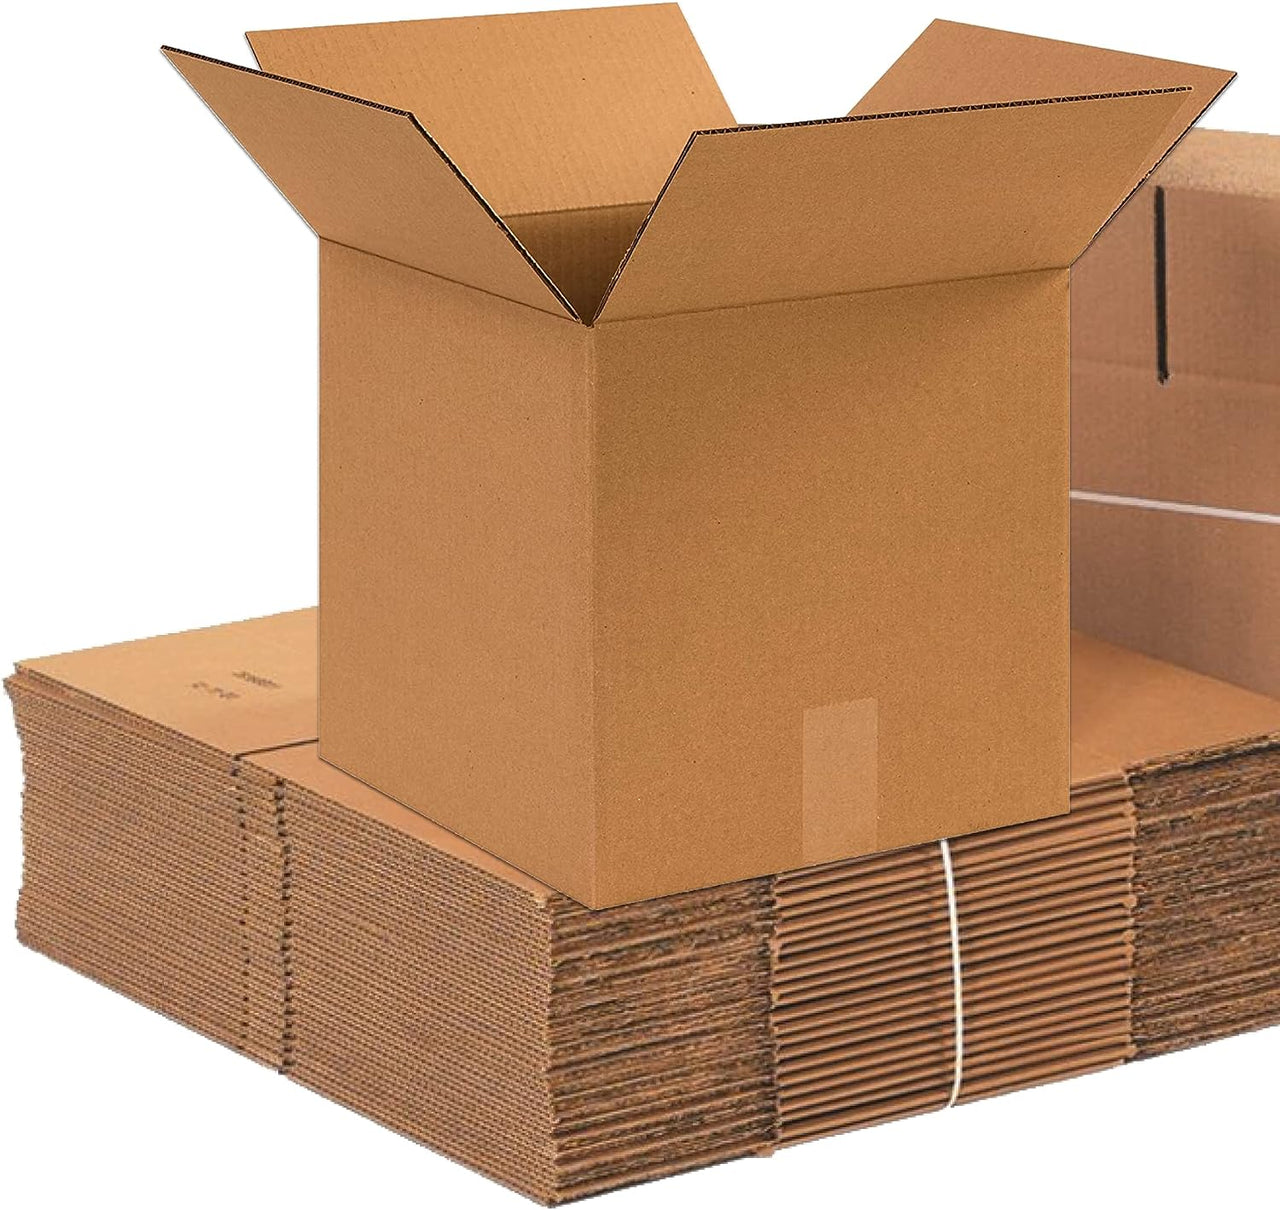 50 Pack Shipping Boxes 8"L x 8"W x 8"H Corrugated Cardboard Box for Packing Moving Storage